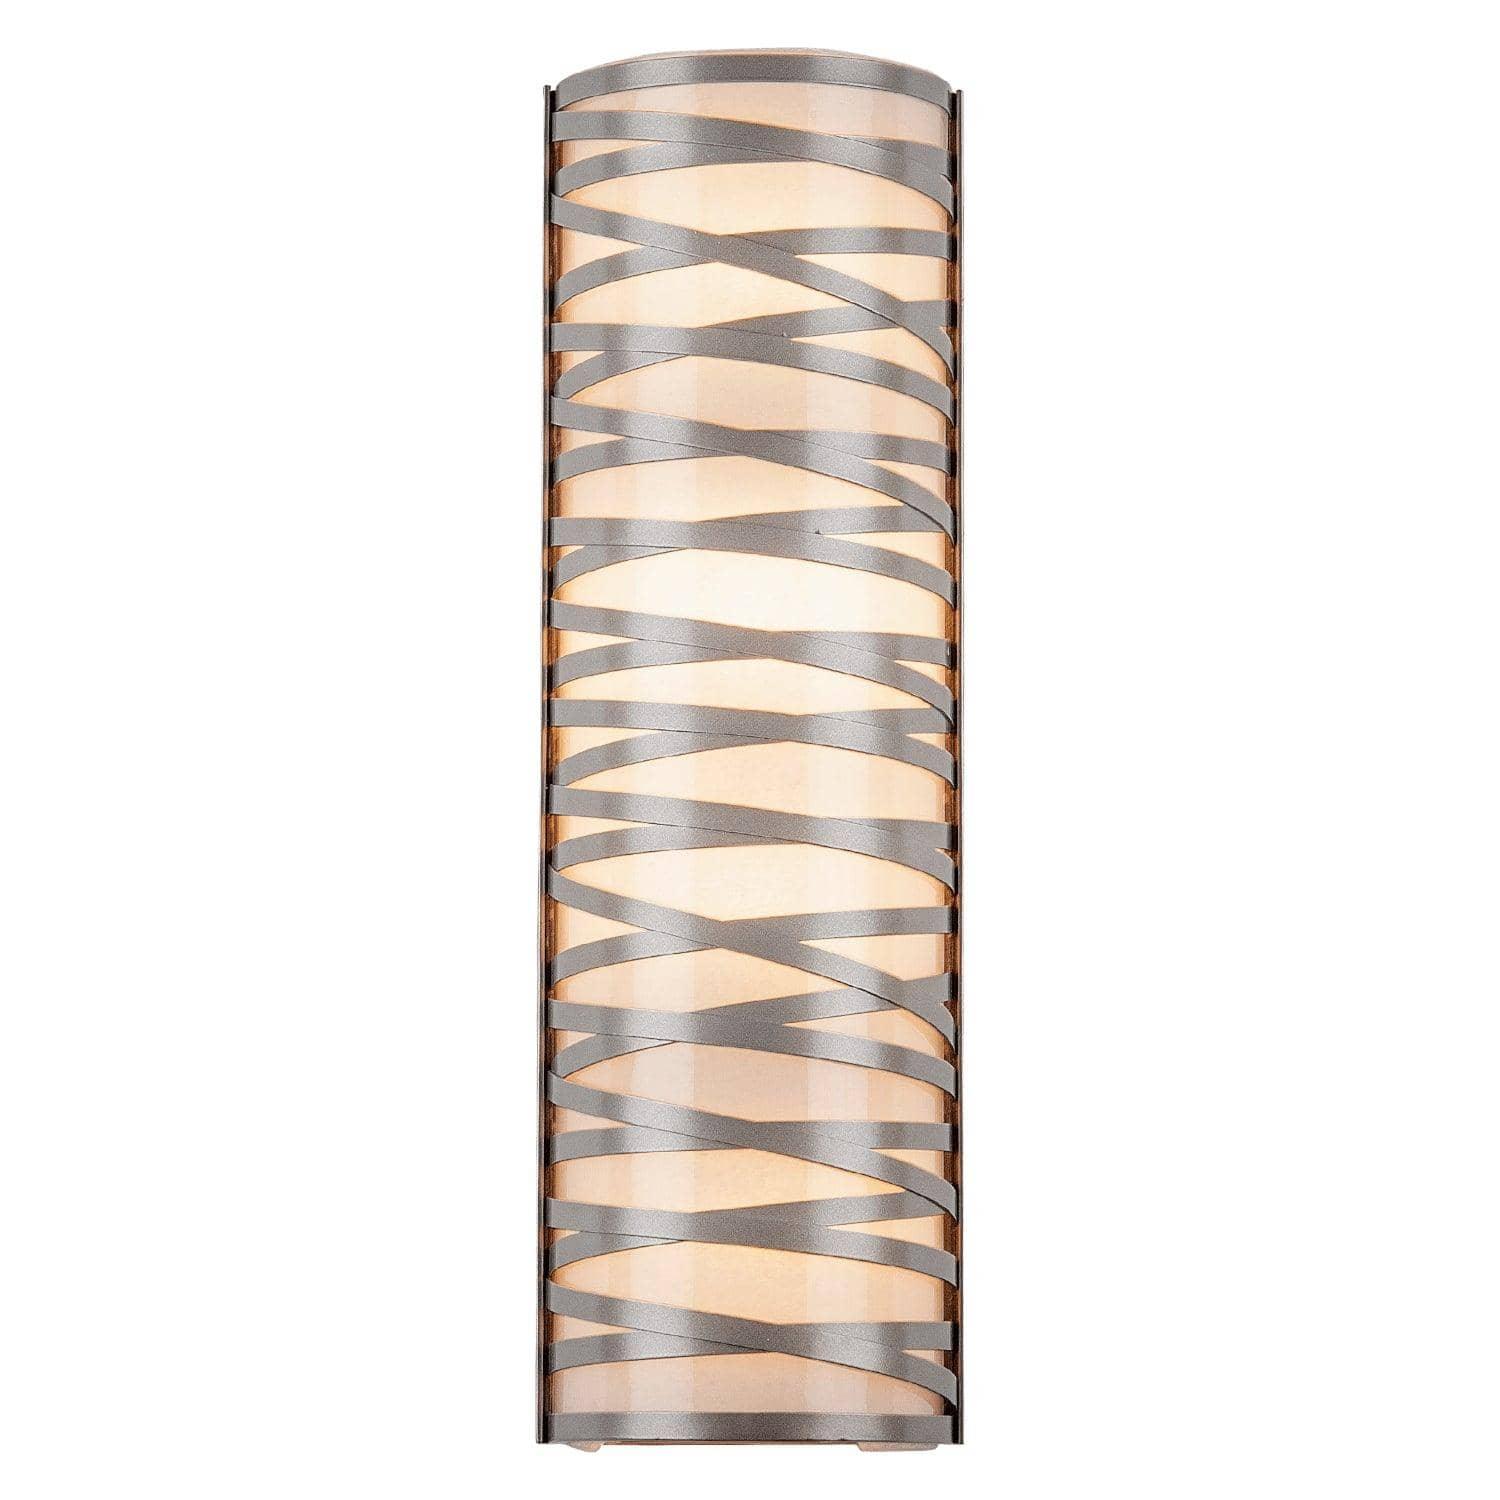 Hammerton Studio - Tempest Cover Sconce, -inch - CSB0013-24-BS-F-E2 | Montreal Lighting & Hardware